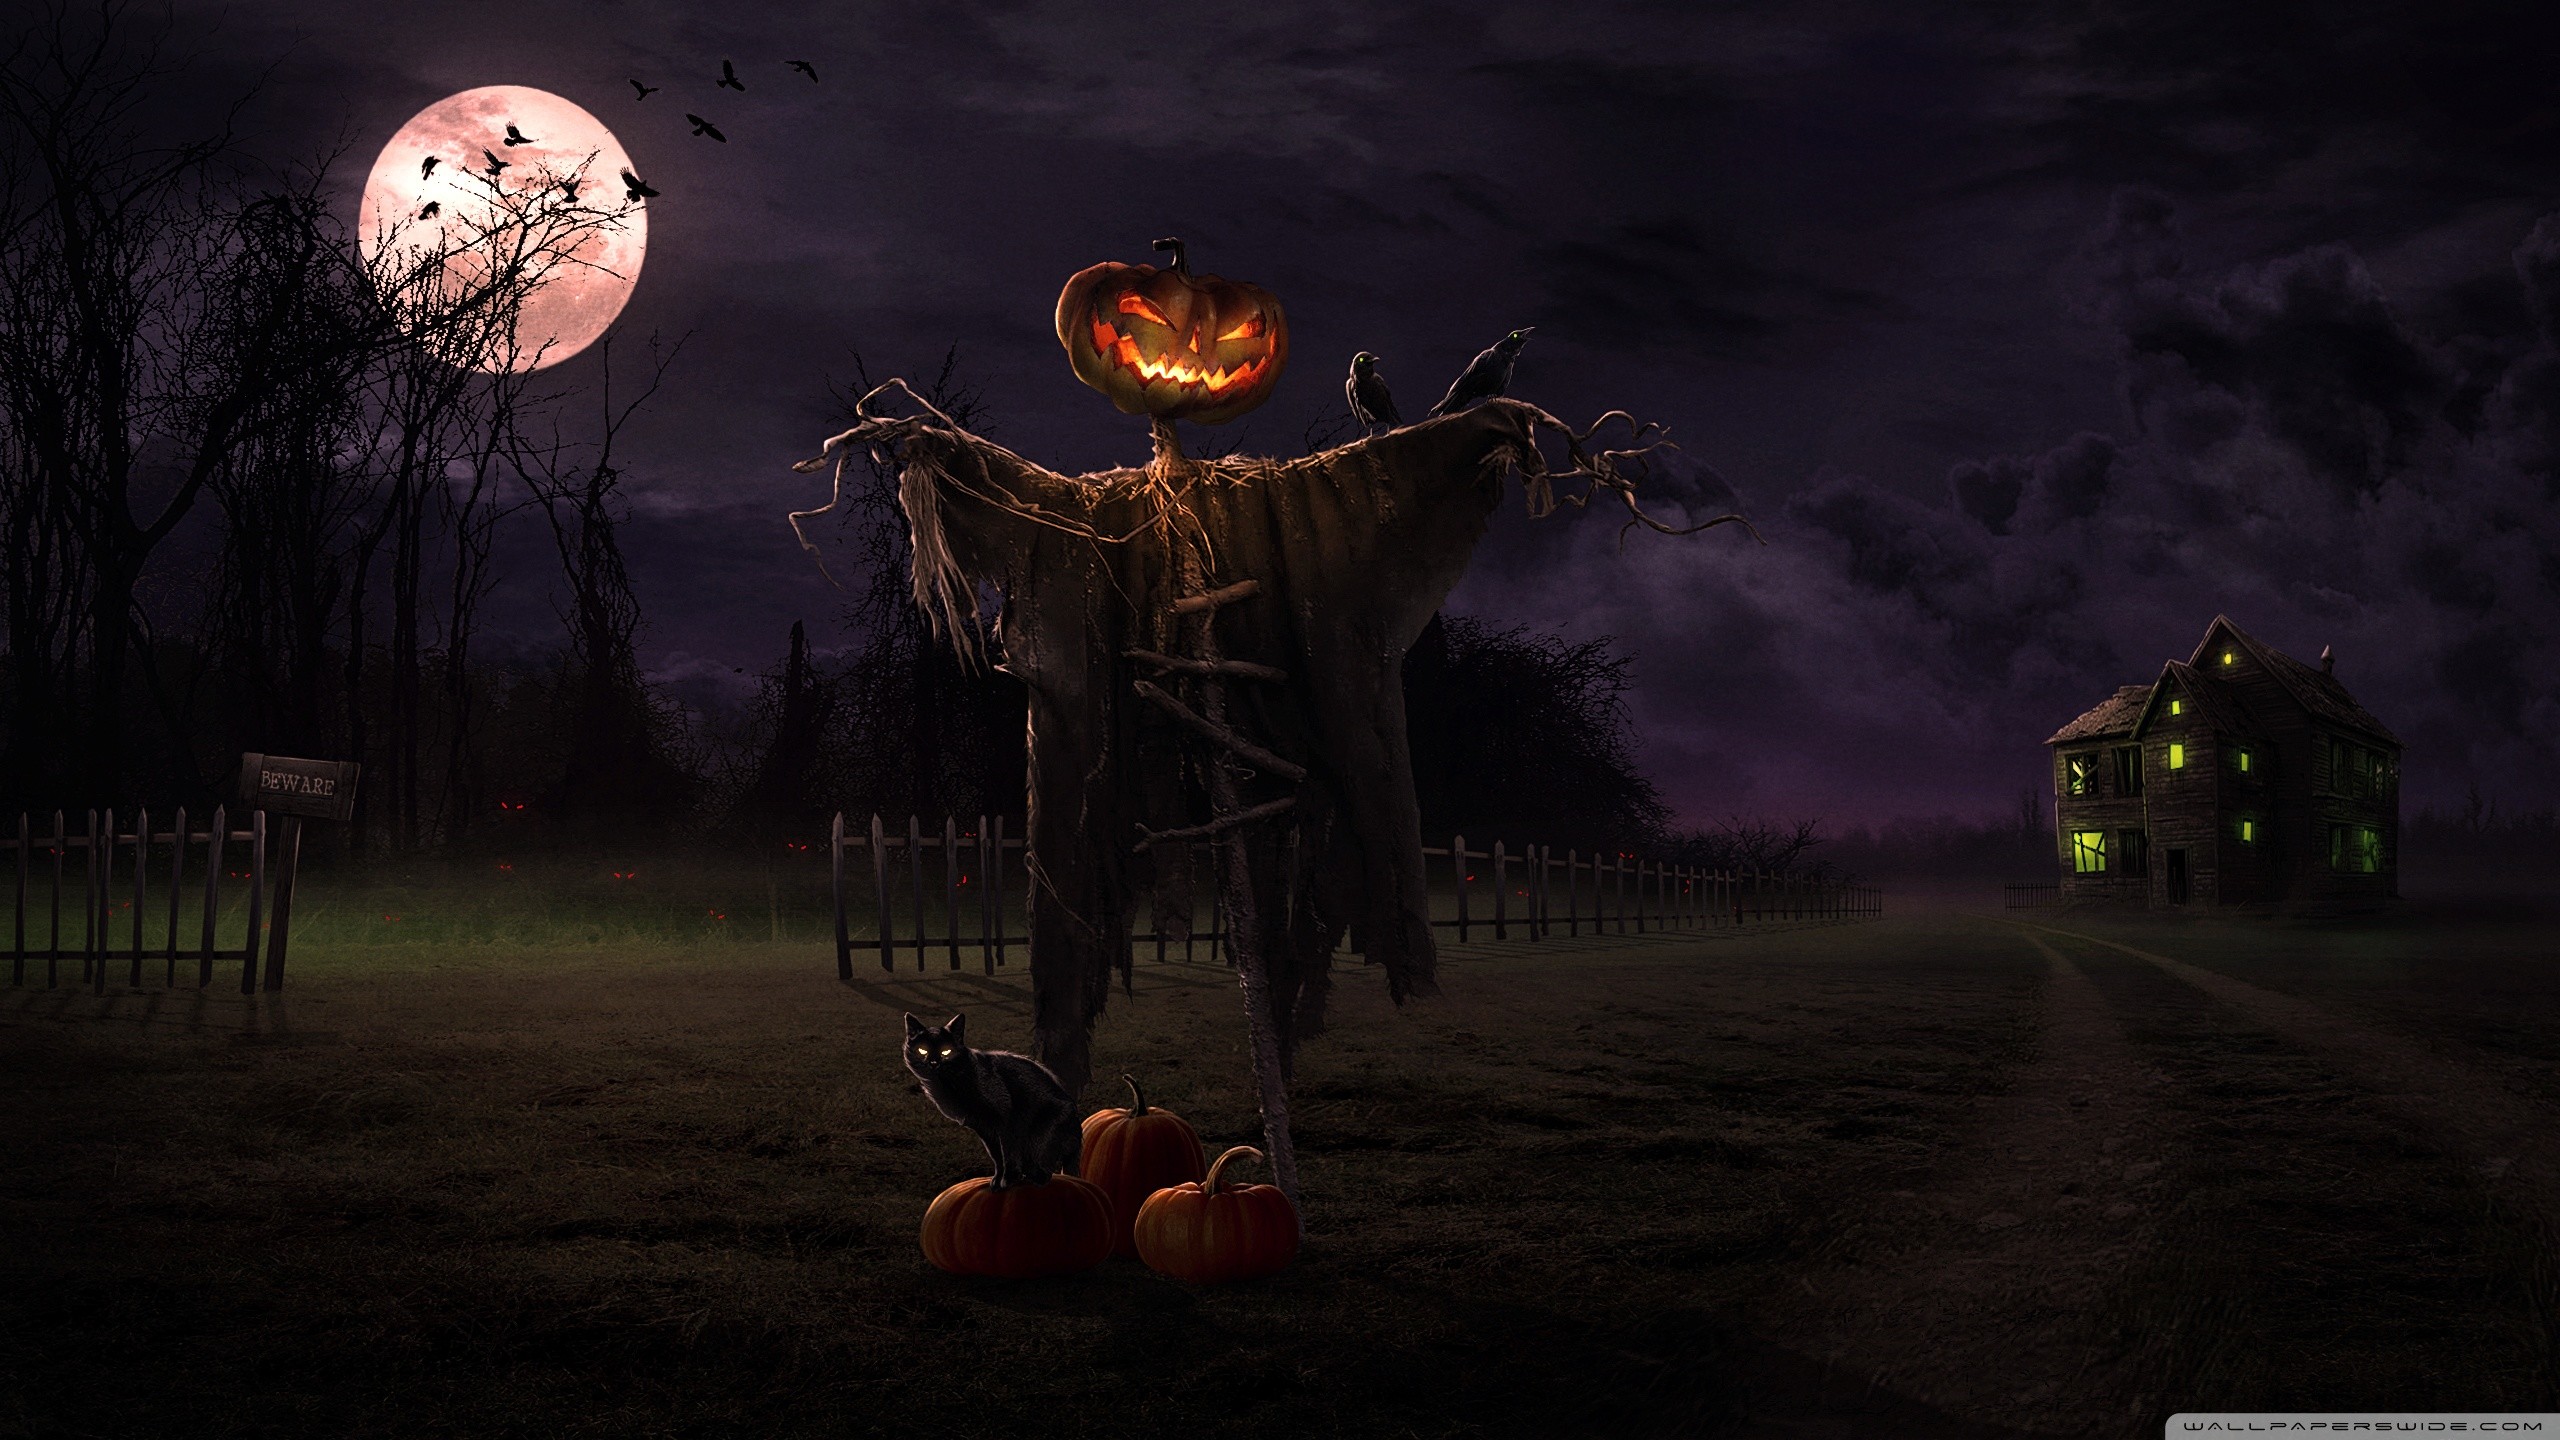 2560x1440 Halloween Spooky Wallpapers & Images. PlusQuotes